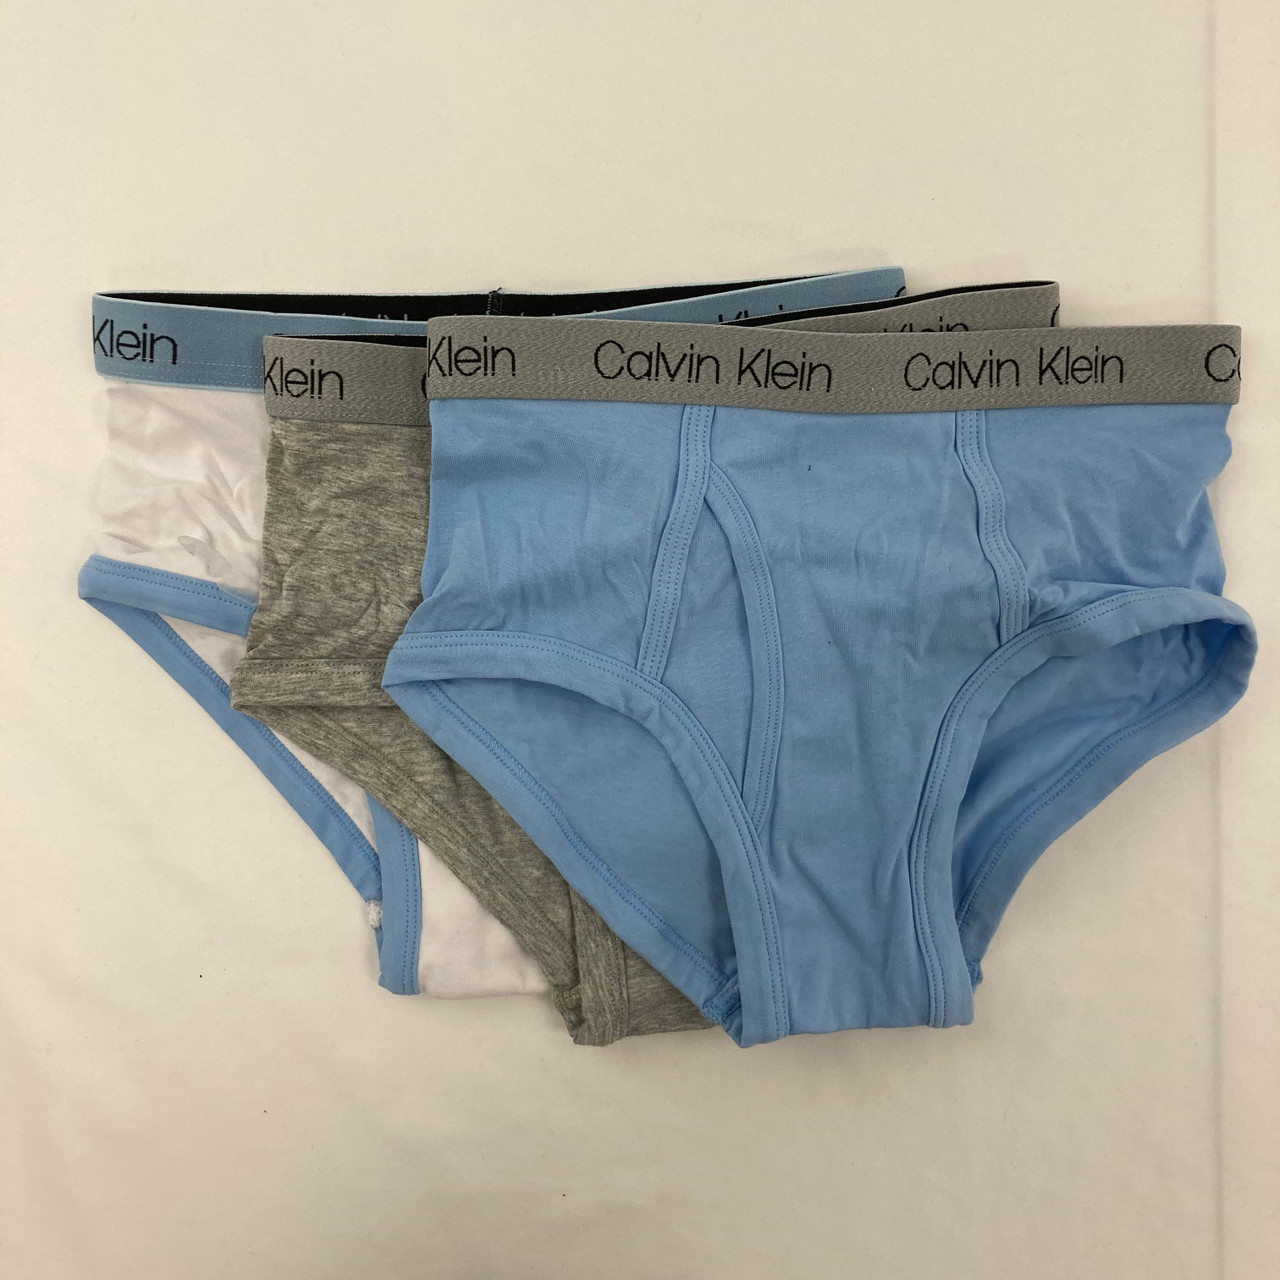 Shop for Calvin Klein, Knickers, Lingerie